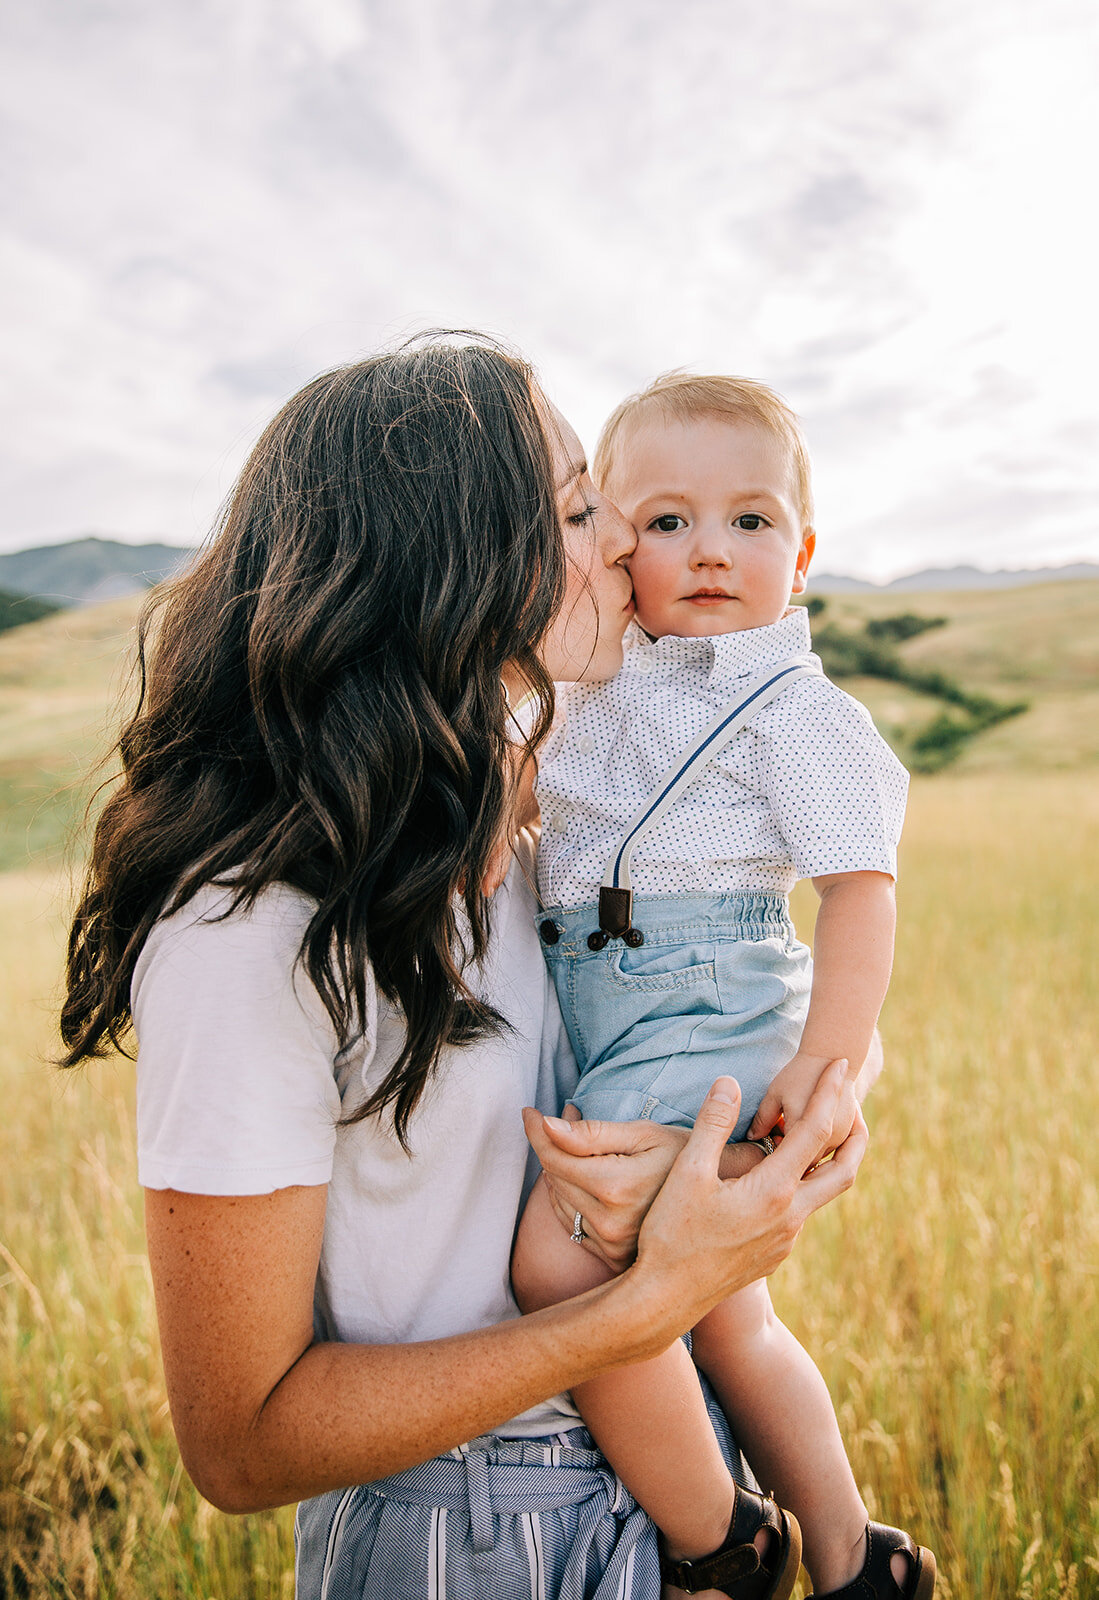  family pictures mom and baby boy shades of blue outfit coordination for family photos in summer logan utah family photographer bella alder photography blue suspenders baby boy mom kissing her baby boy mom and son posing together woman holding her ch